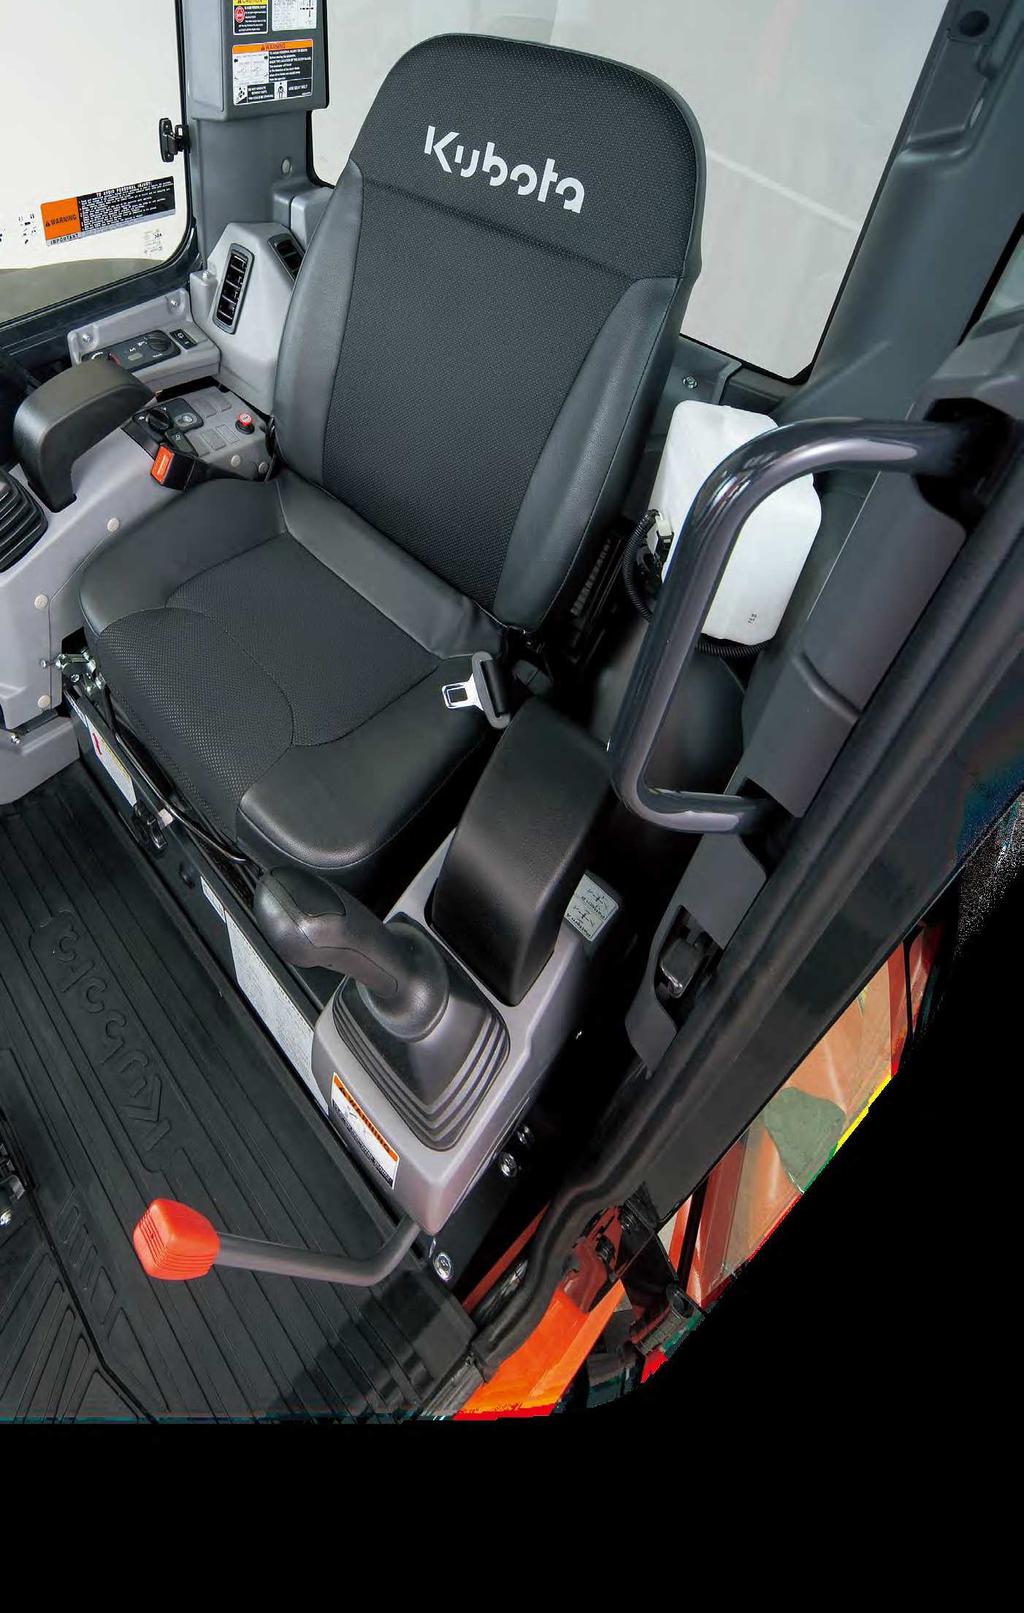 A. Deluxe Suspension Seat A Kubota s high back suspension seat has been designed for